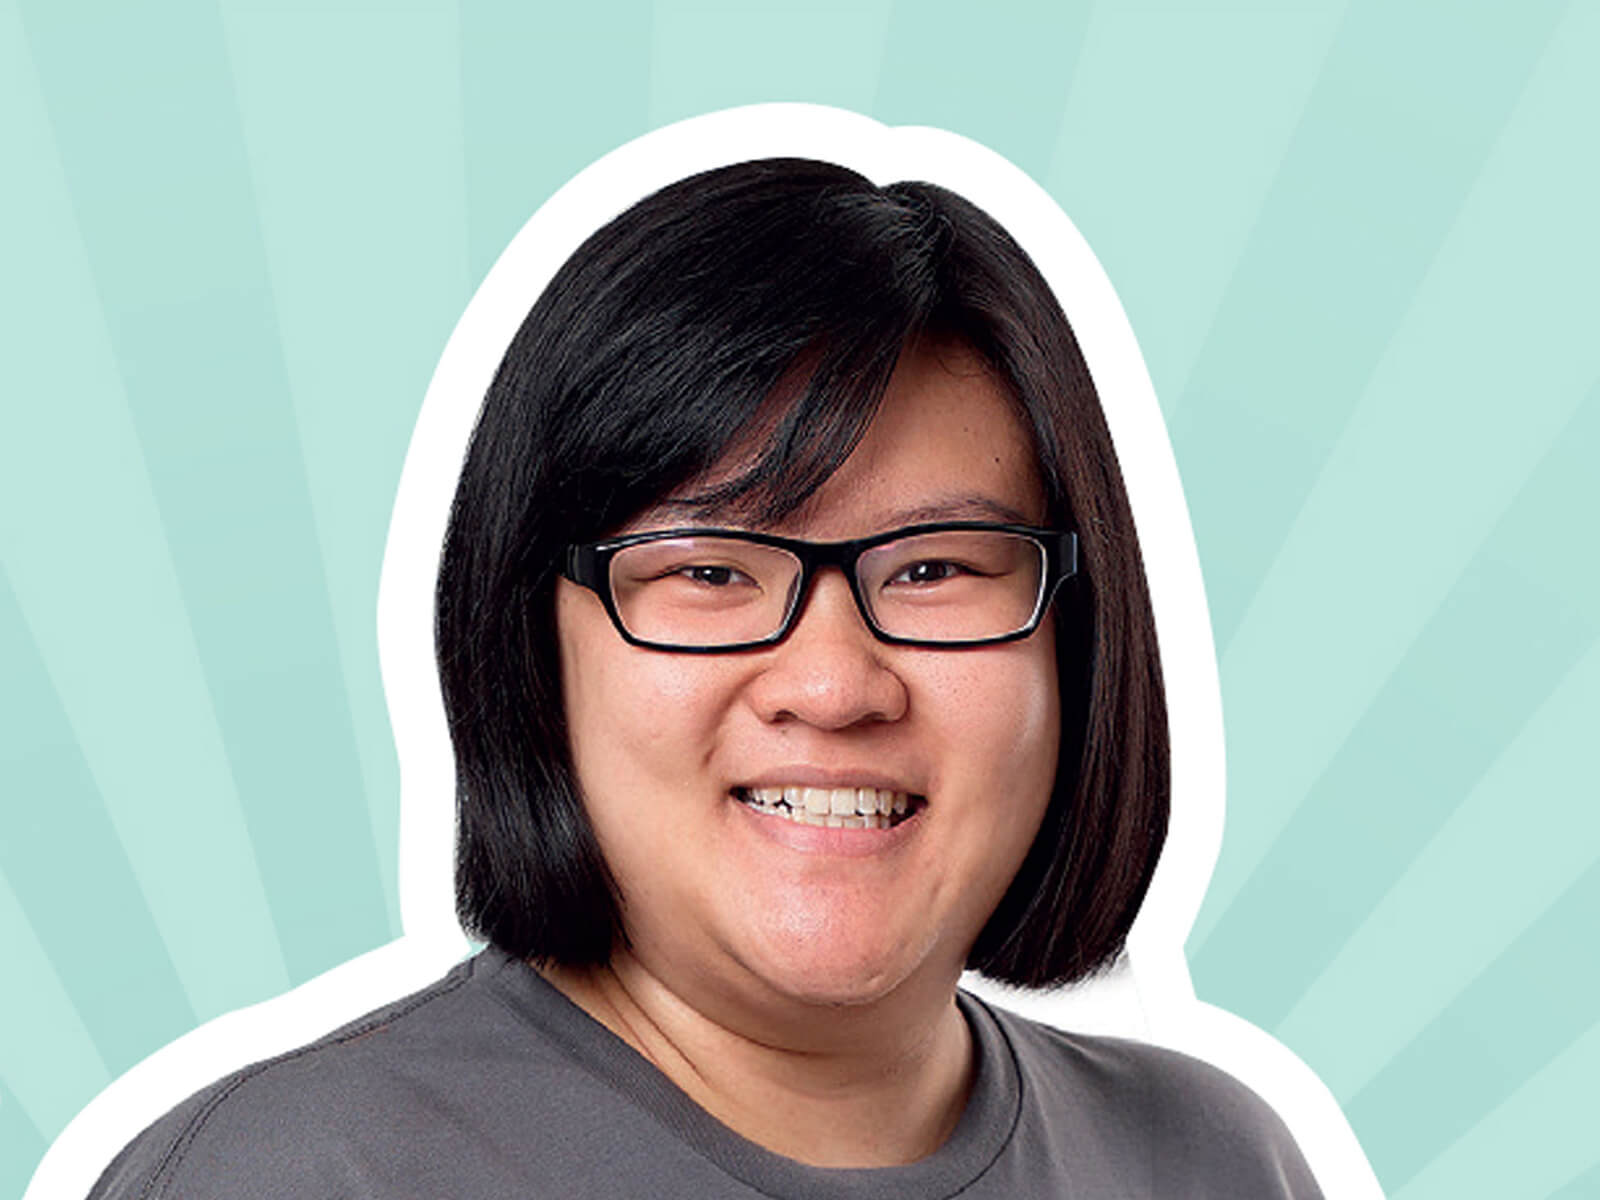 Headshot of alumna Chiang Wan Ting Gina against green striped background